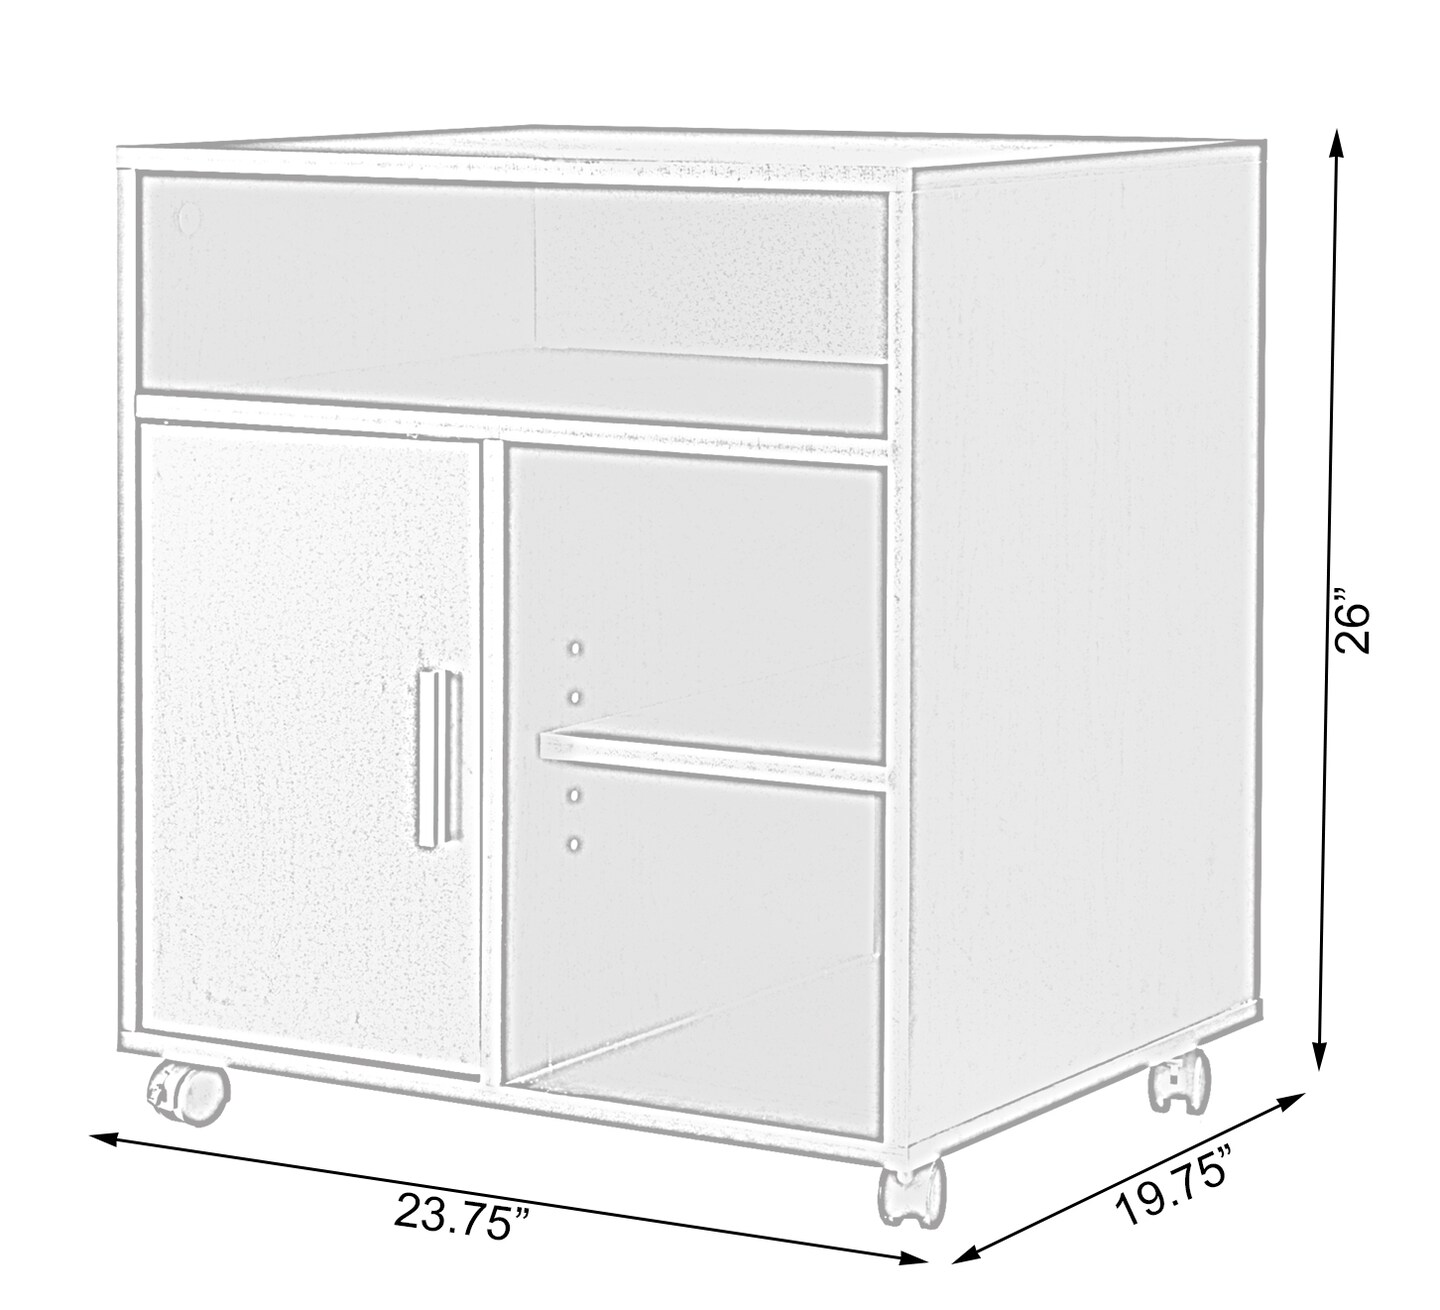 Printer Kitchen Office Storage Stand With Casters